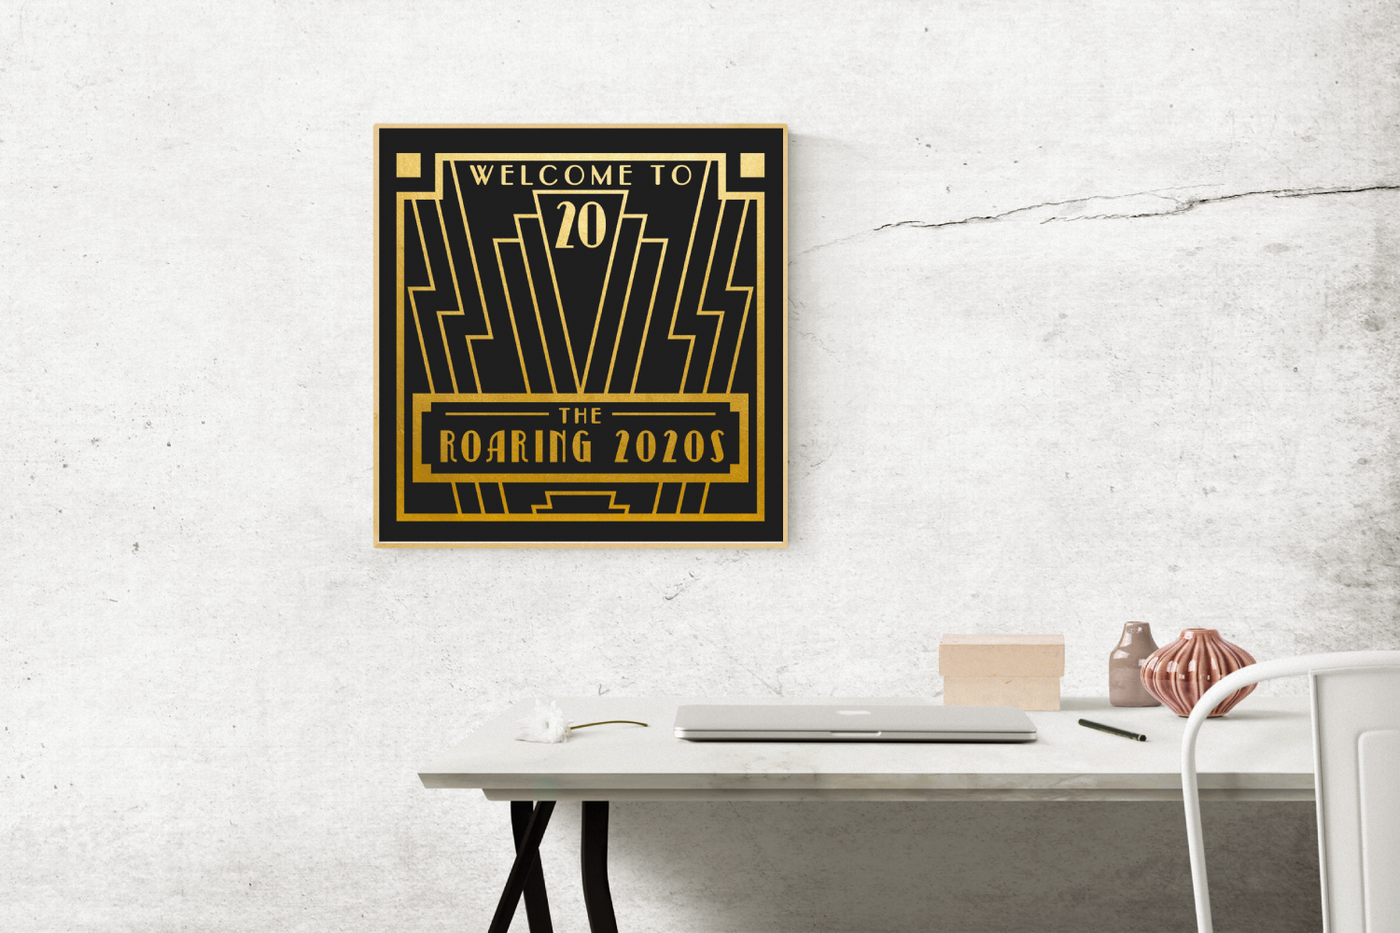 1920s Art Deco style design that says "welcome to the Roaring 2020s"